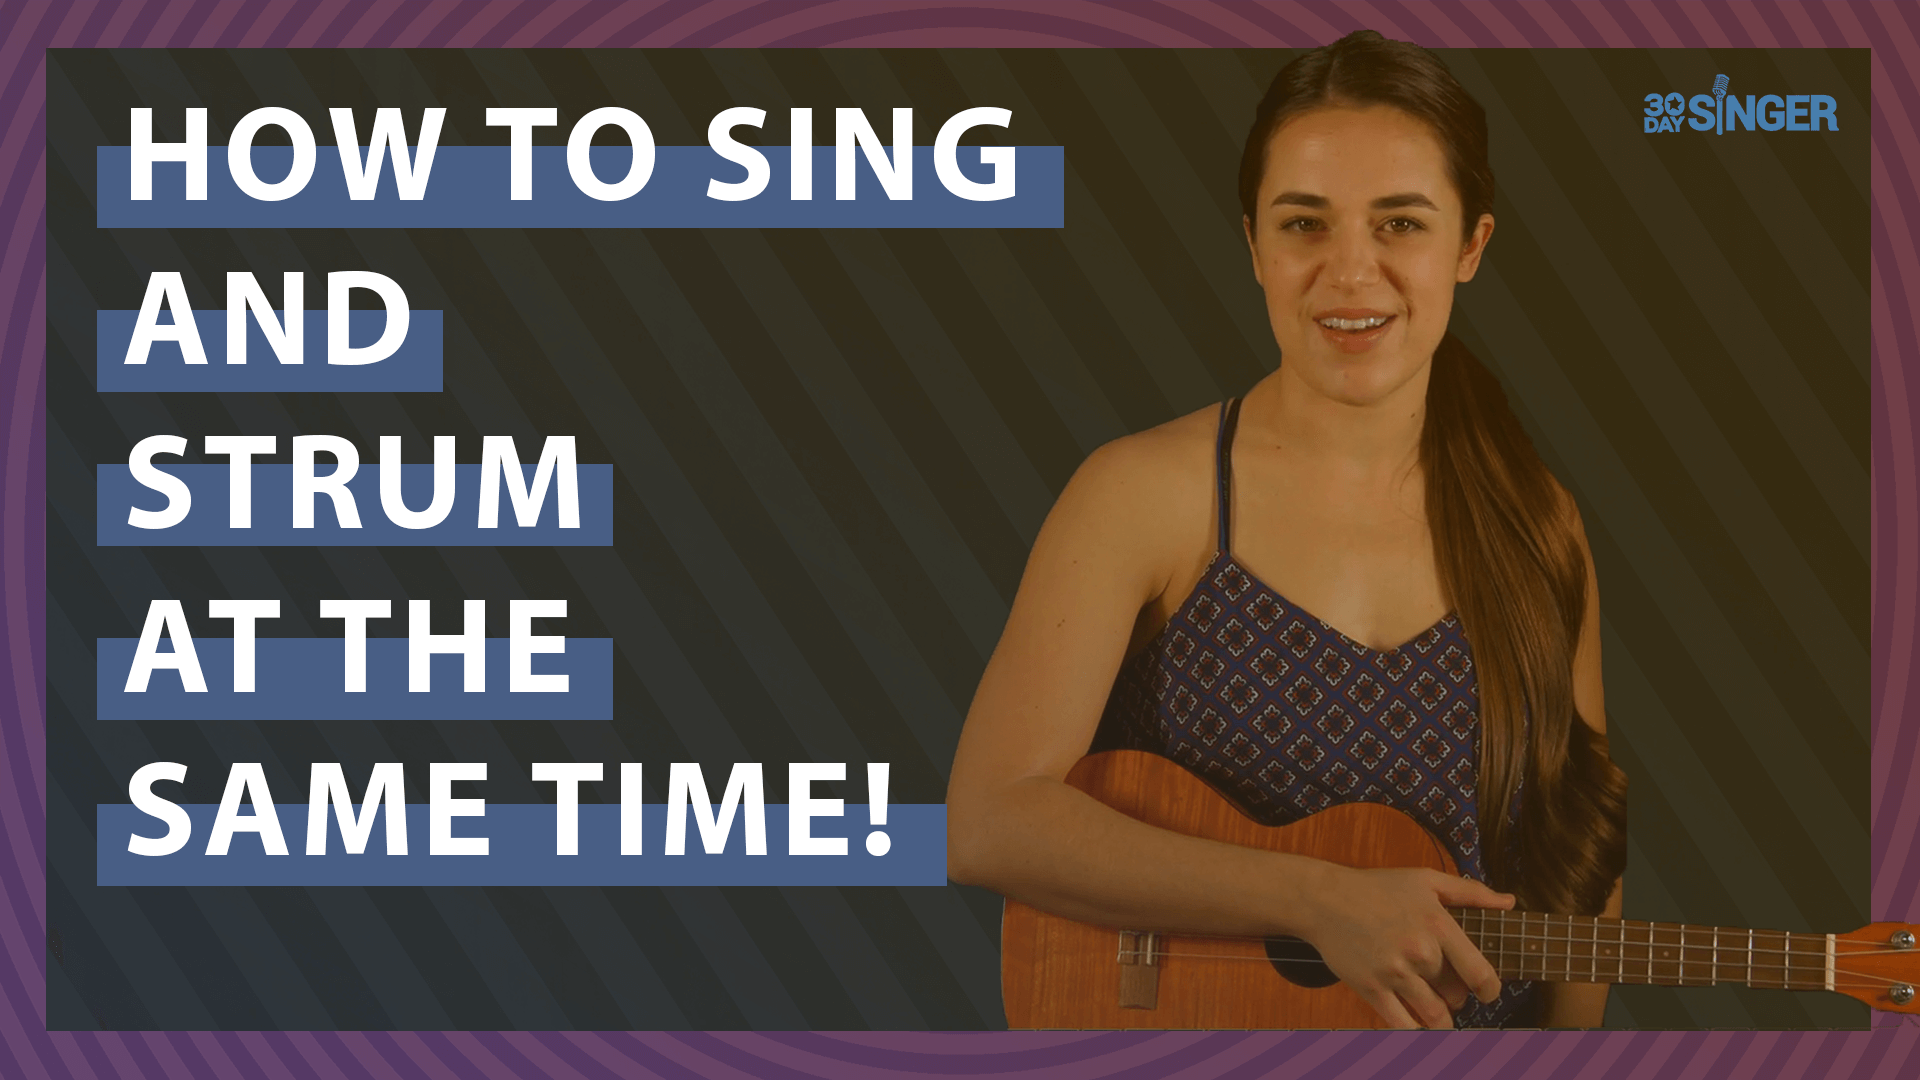 How to Sing and Play Guitar / Ukulele at the Same Time